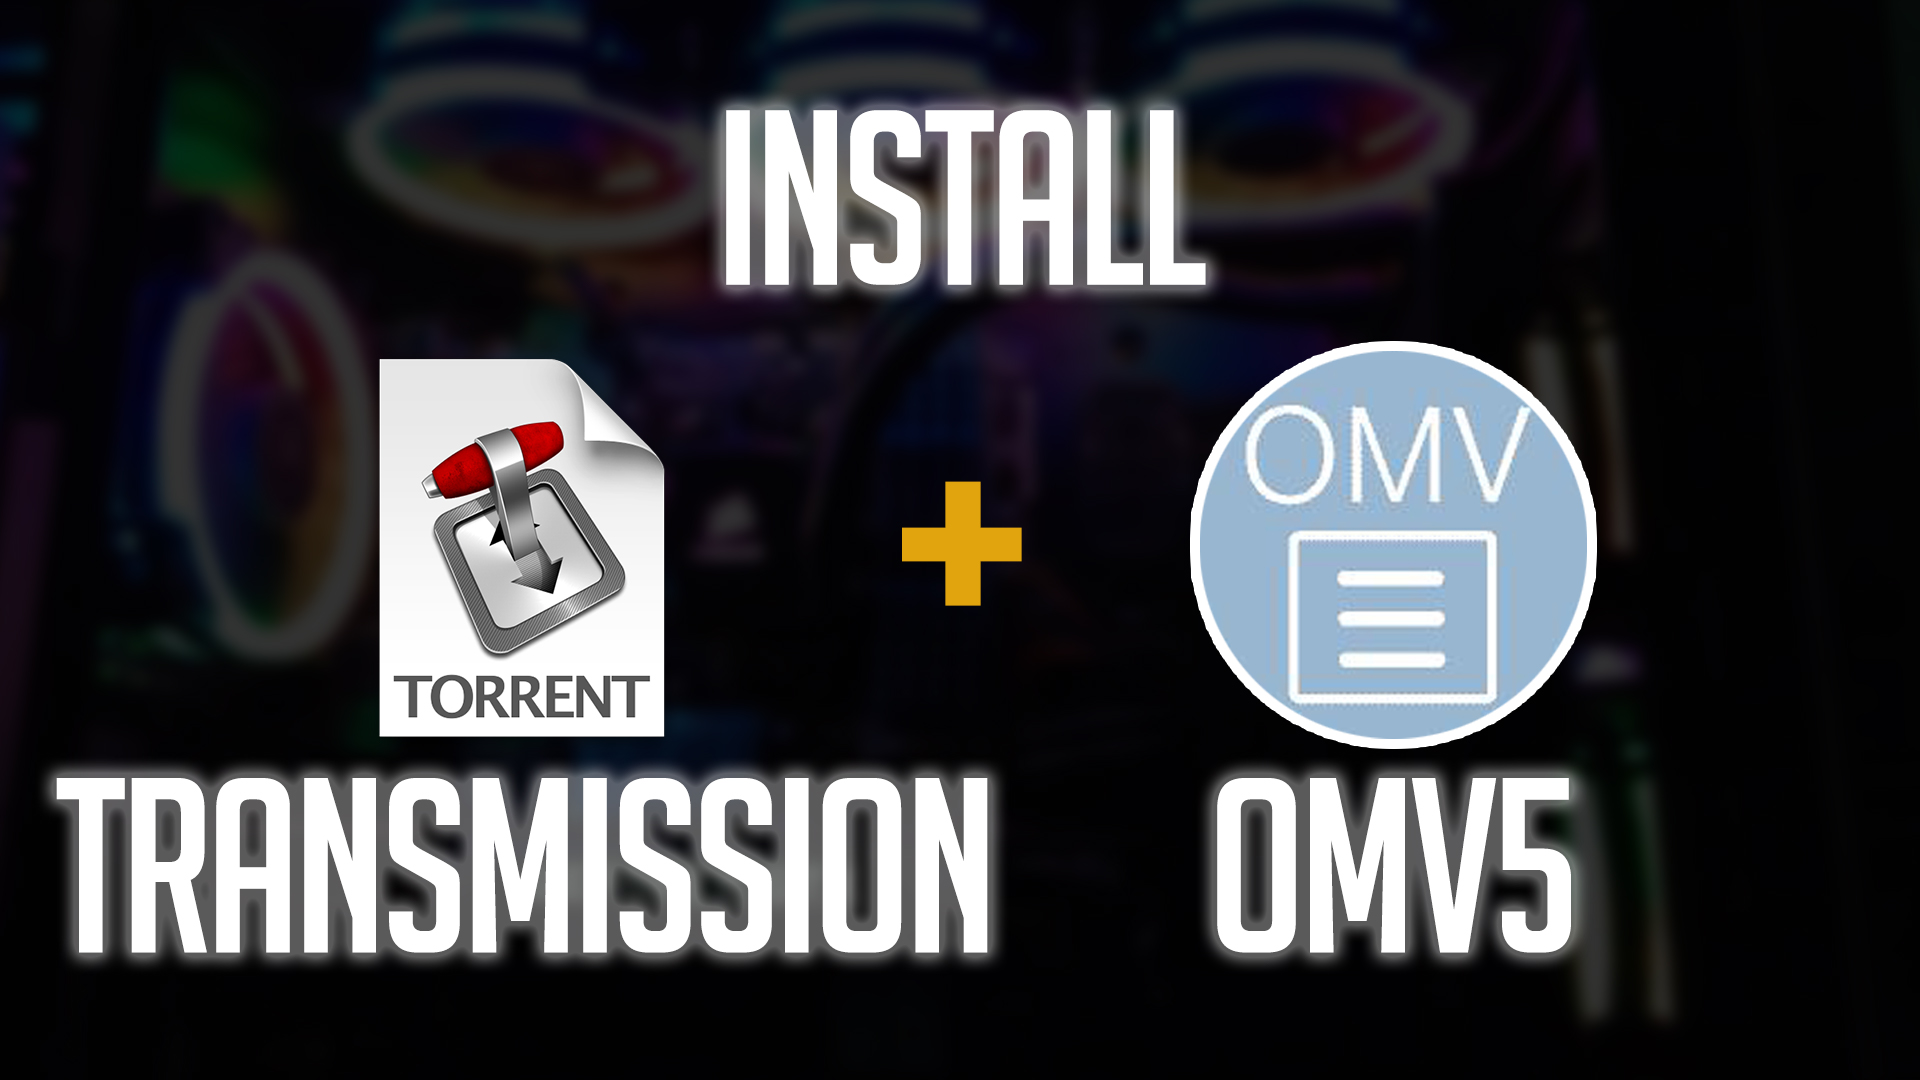 How to Install Transmission on OpenMediaVault 5